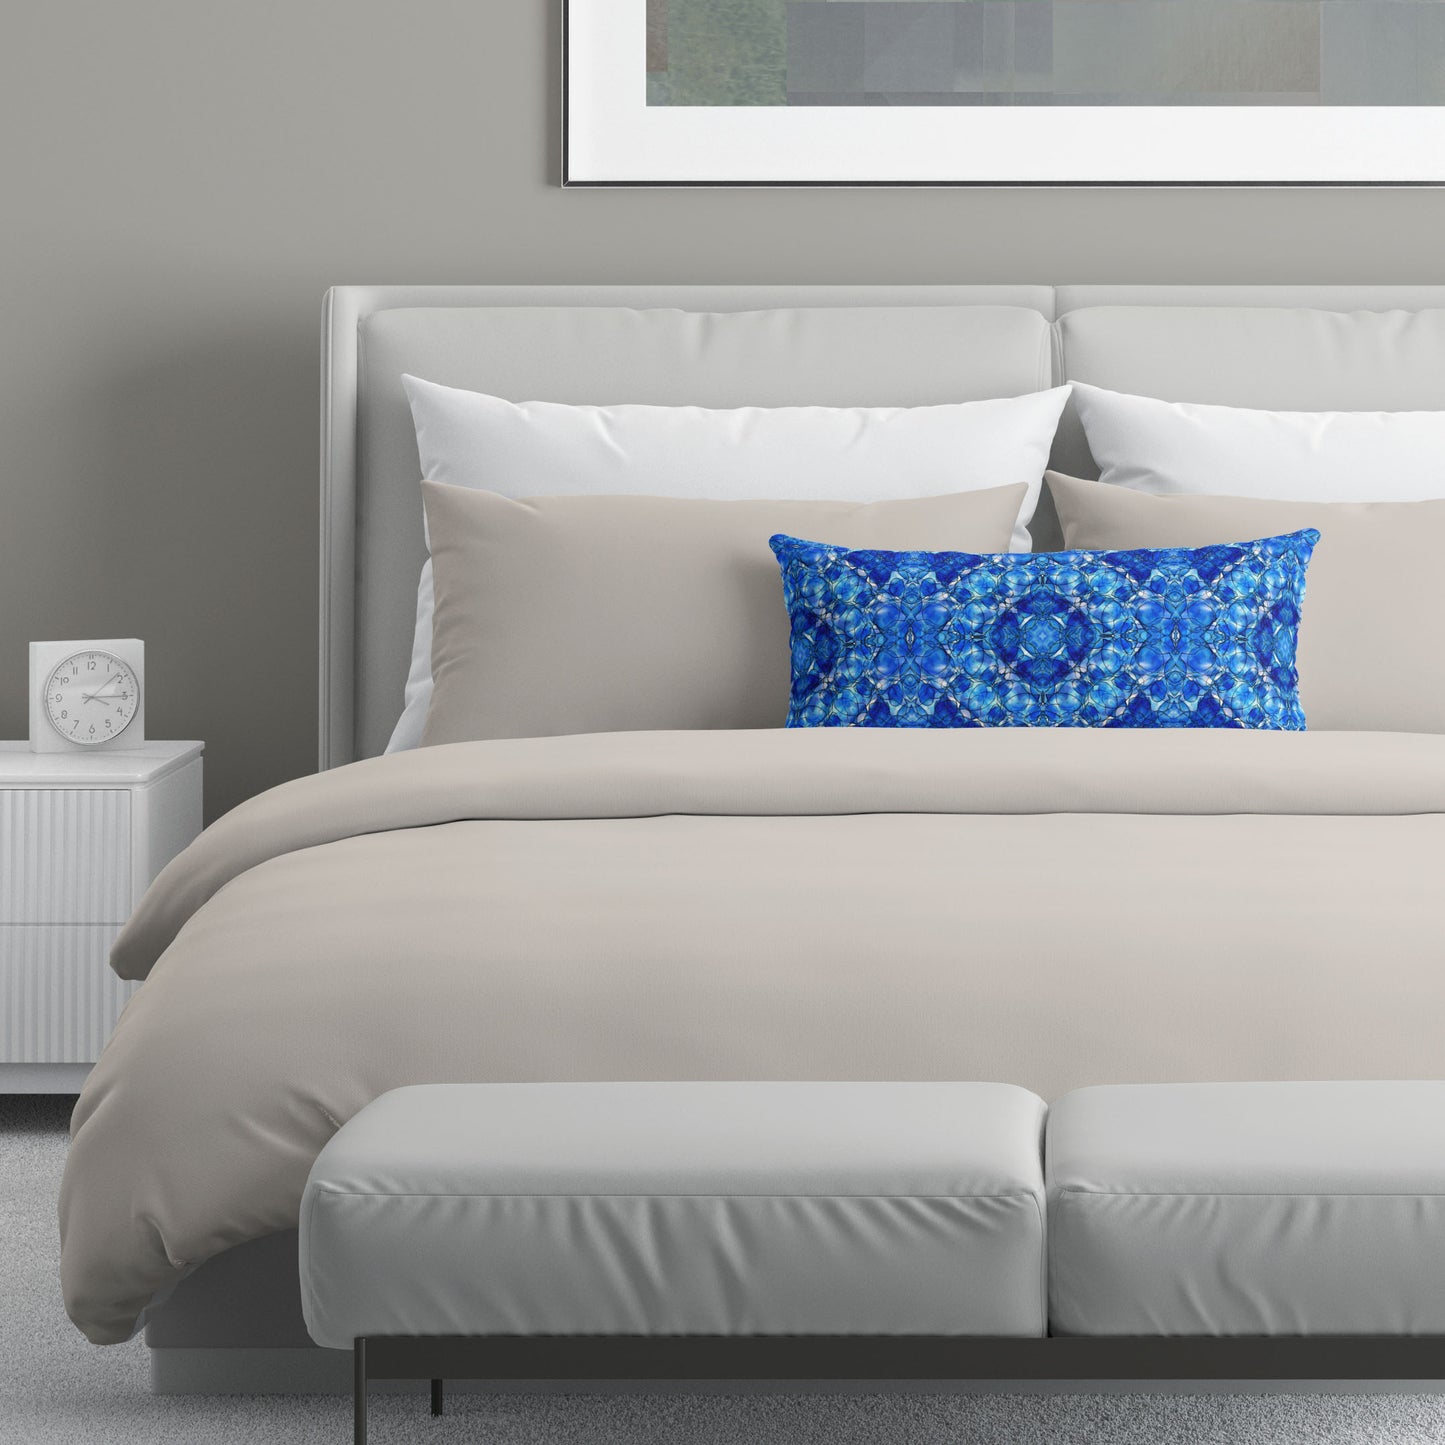 Neutral colored bedroom featuring a bed with a blue abstract patterned lumbar pillow.